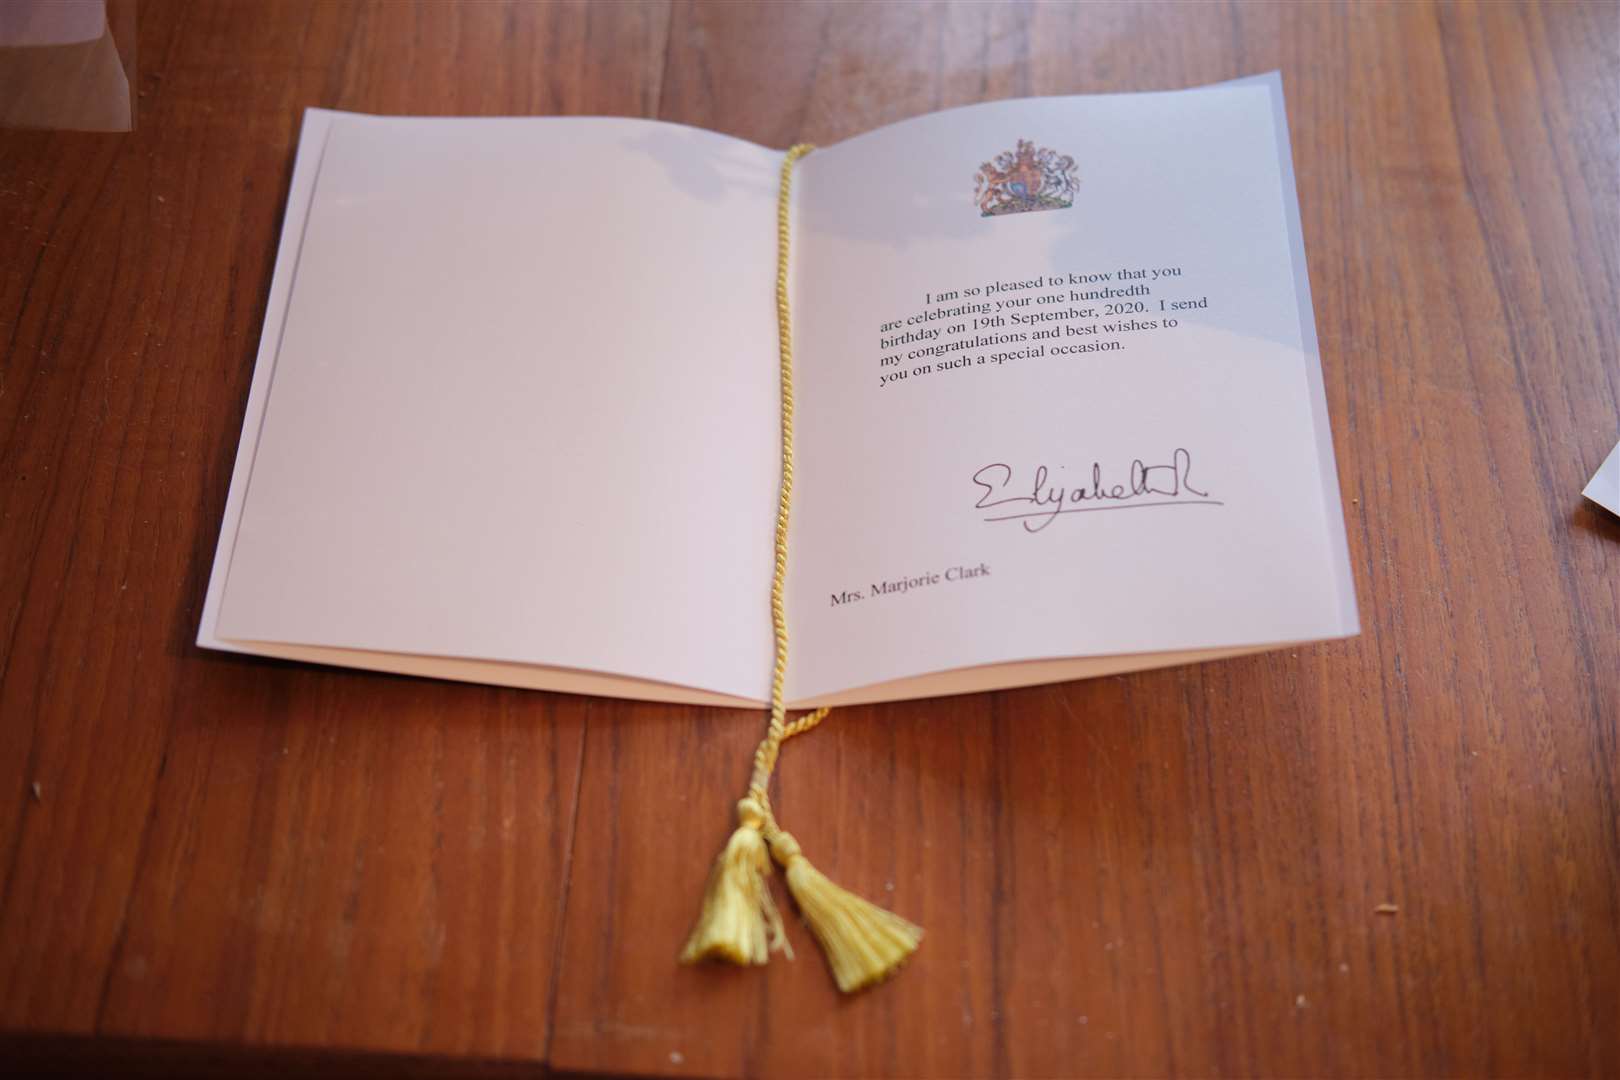 Marjorie Clark's 100th birthday card from the Queen. Photo by Kari Clark